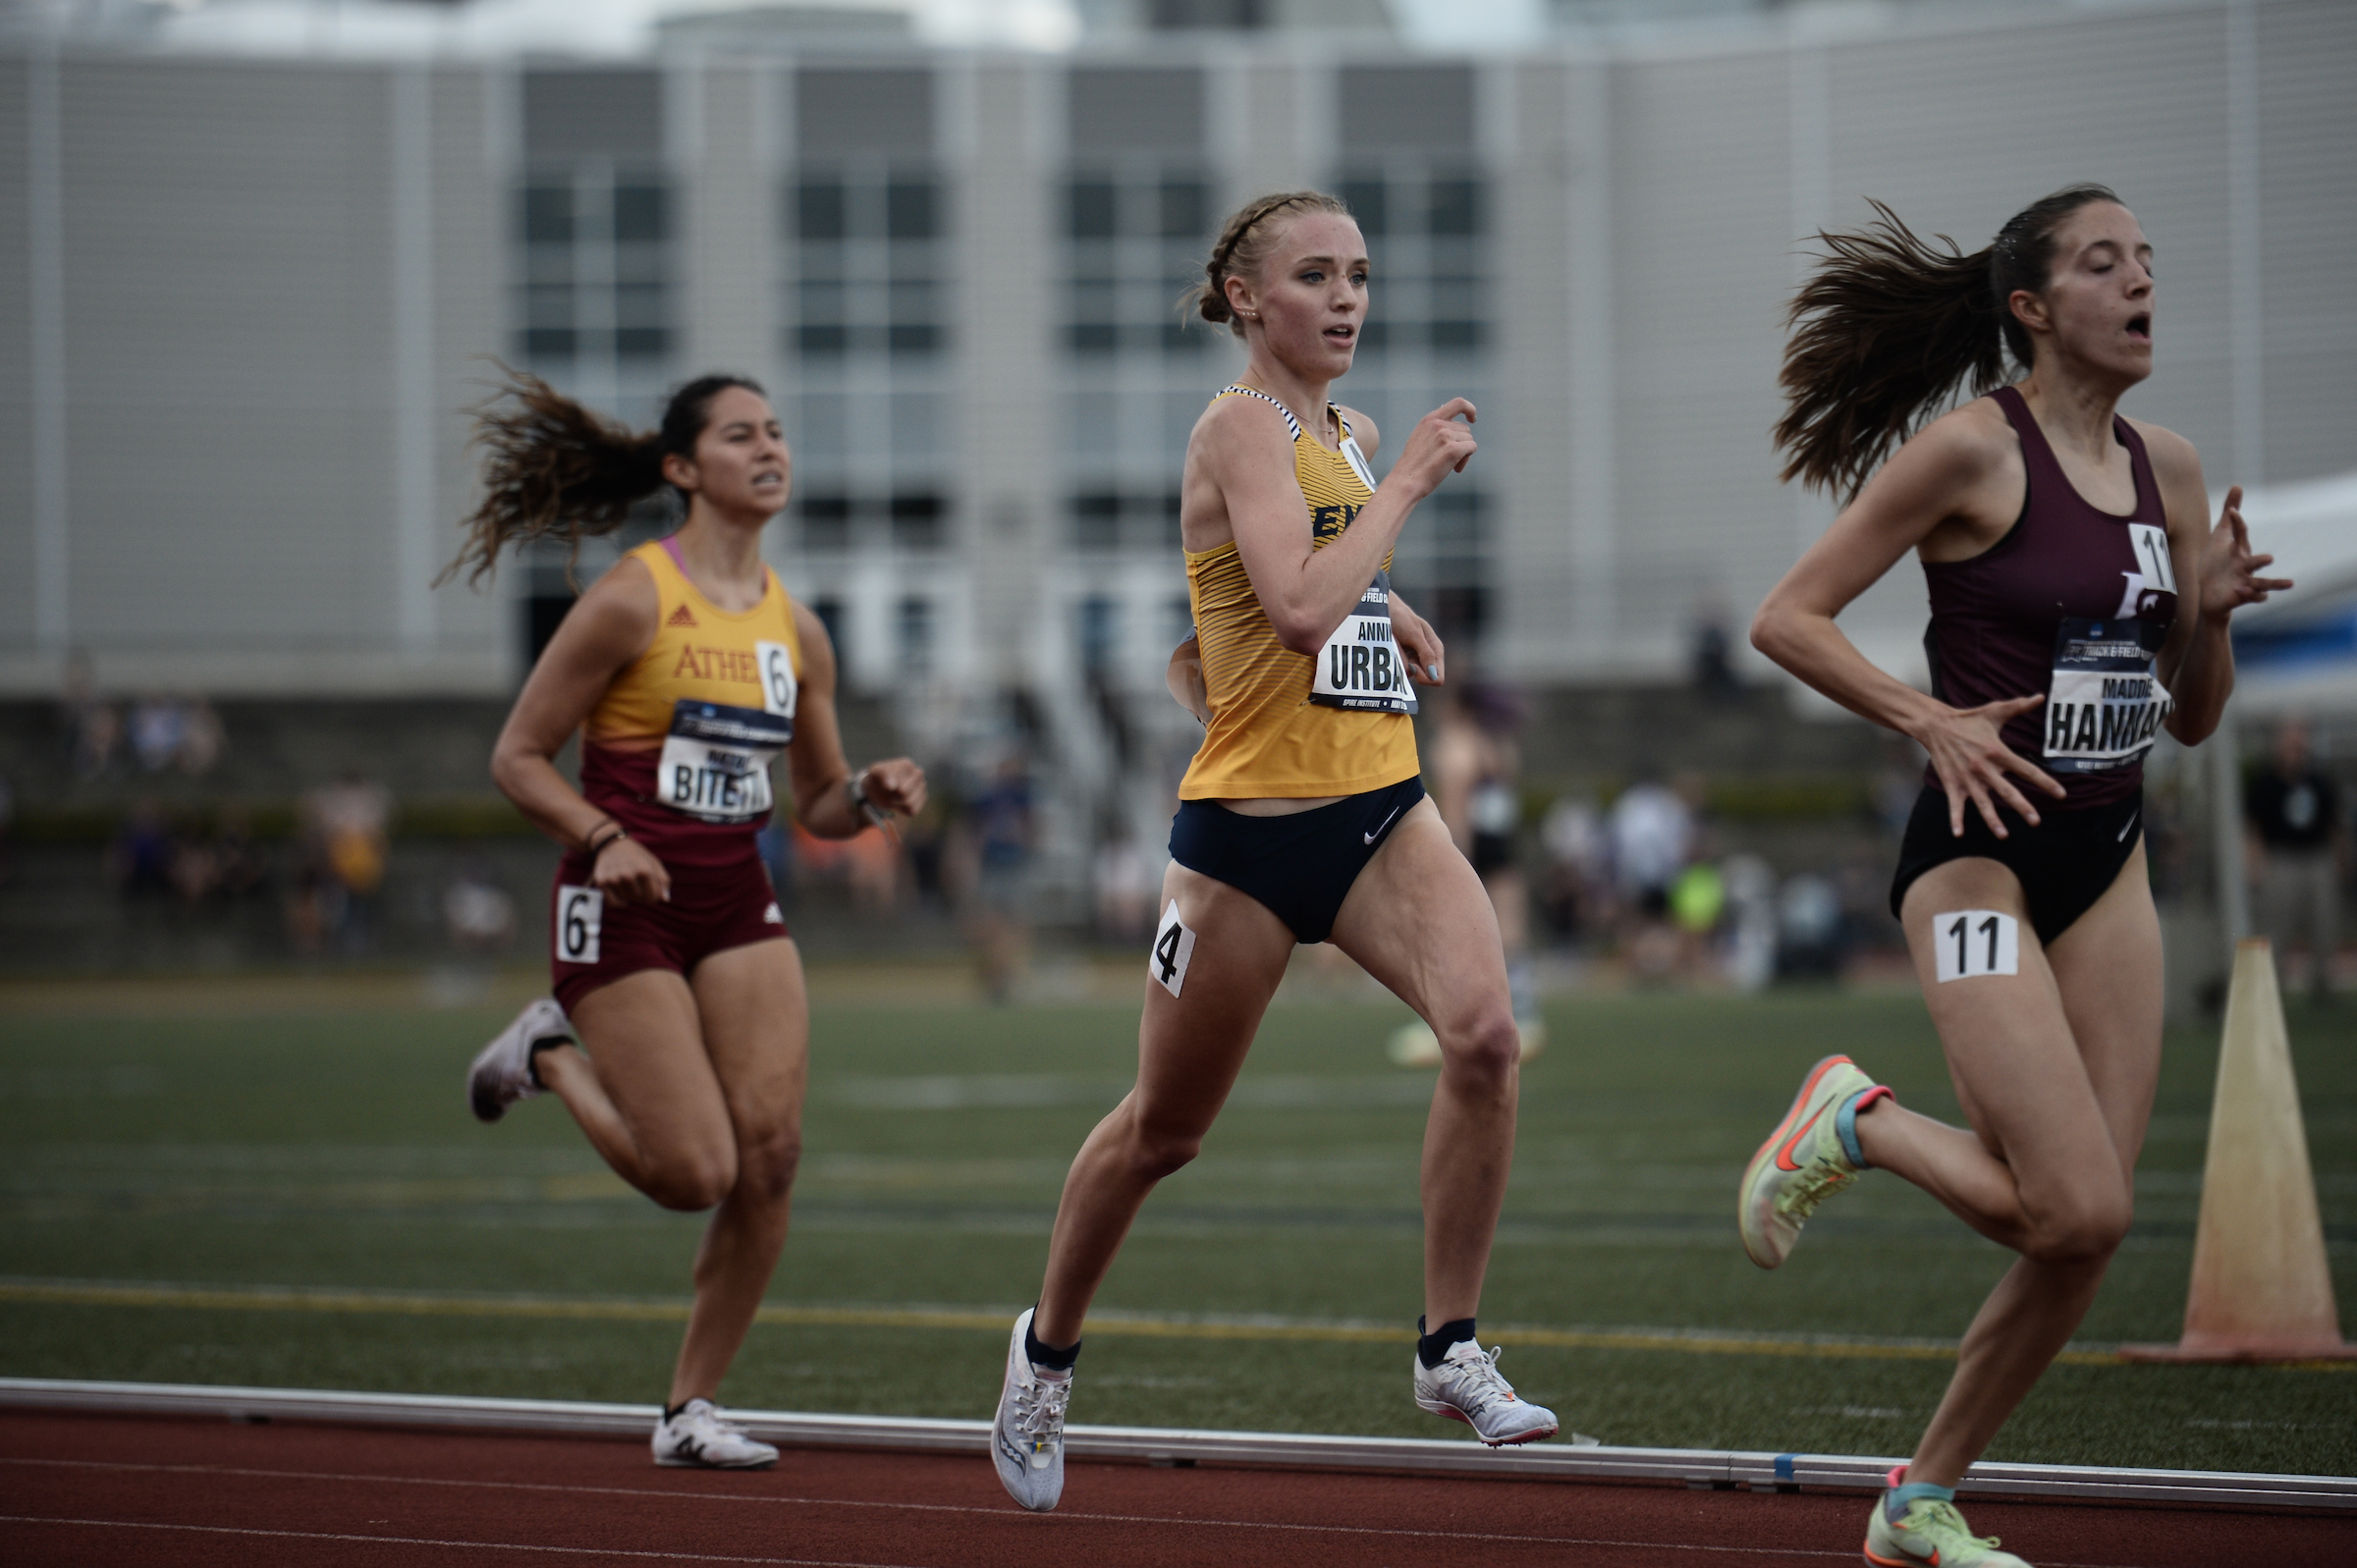 Emory track and field place third at UAA indoor championships The